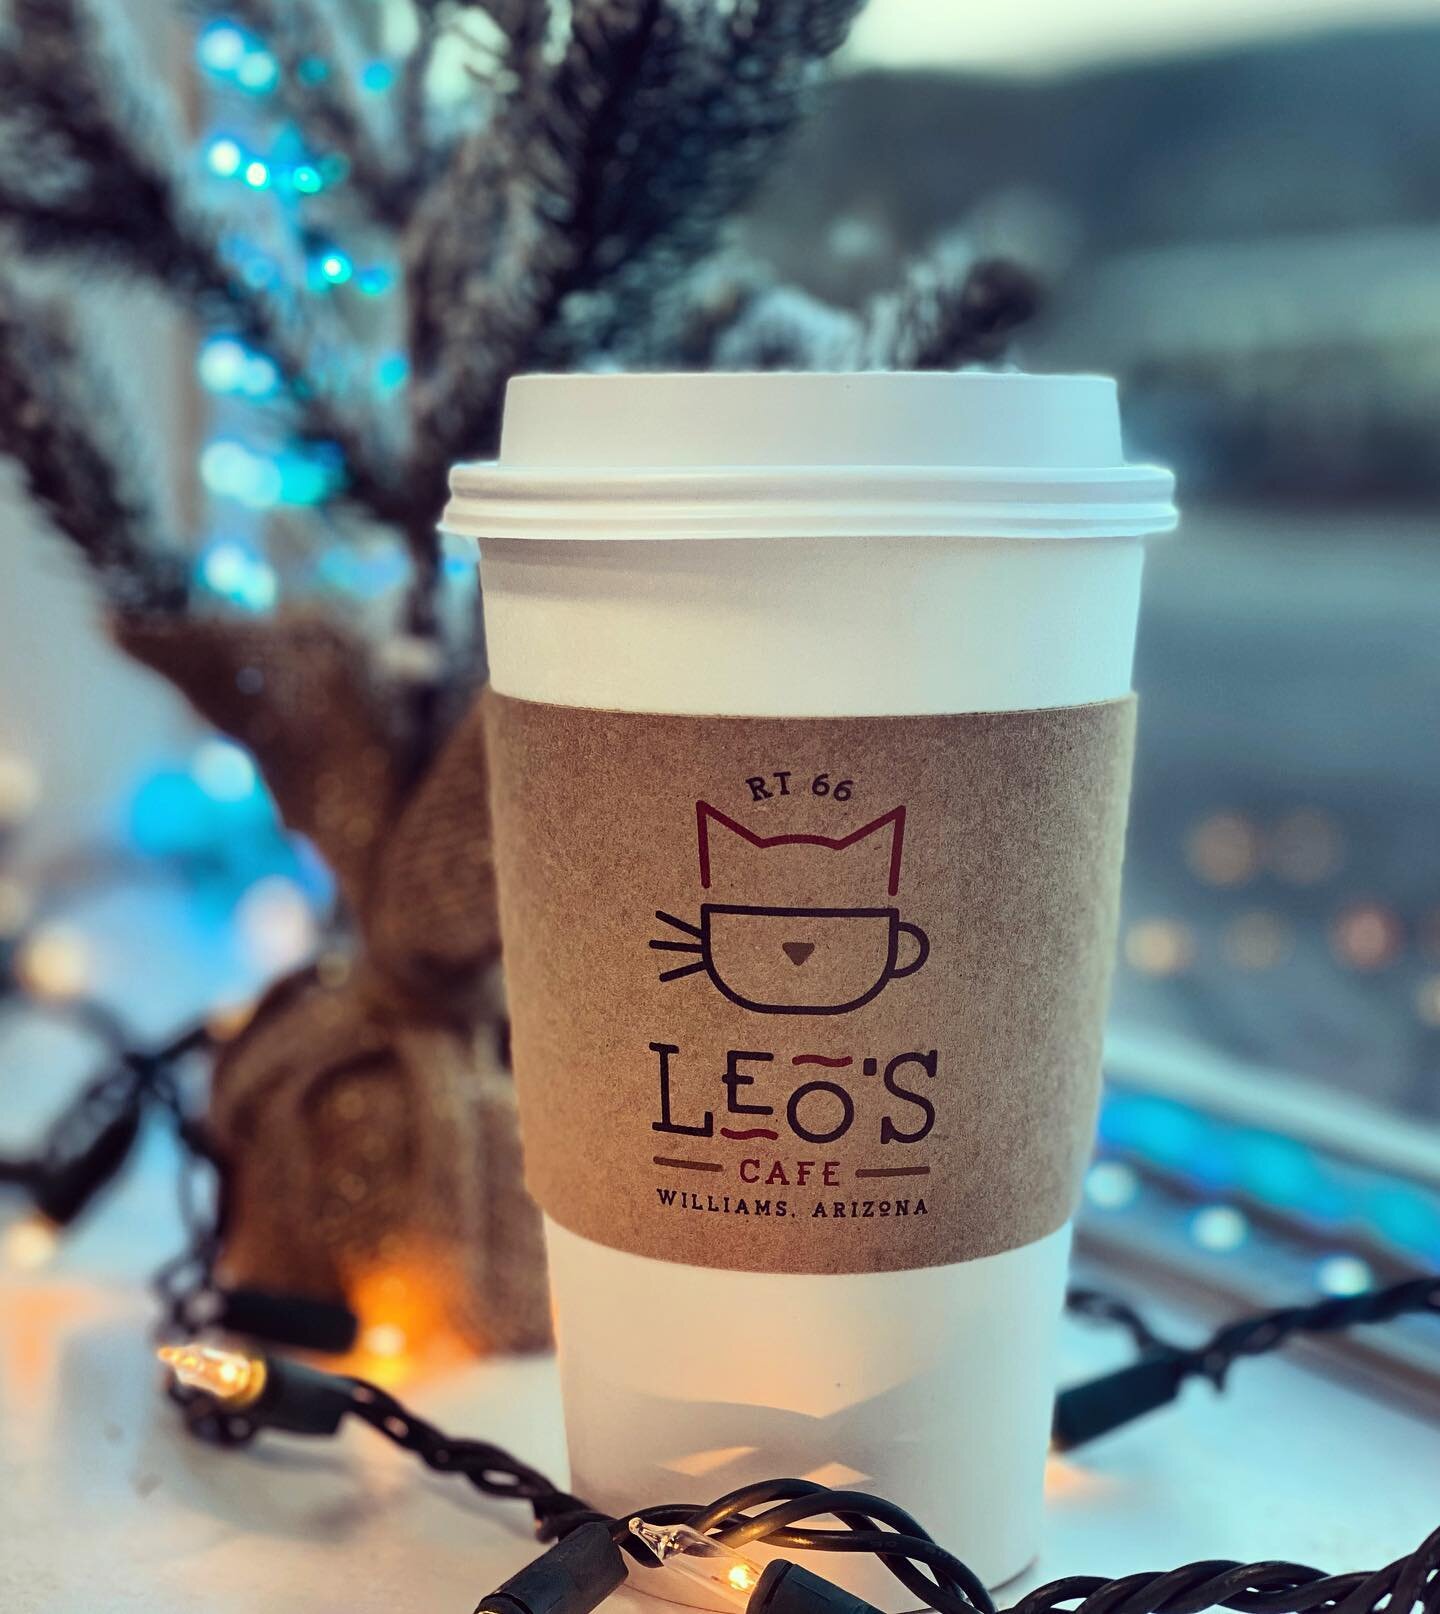 LIMITED TIME ONLY ✨Eggnog Lattes are back✨Enjoy it hot, iced, blended, or with chai. Yum! ☕️
.
.
#leoscafeaz #leoscafe #williams #route66 #grandcanyon #coffee #barista #williamsaz